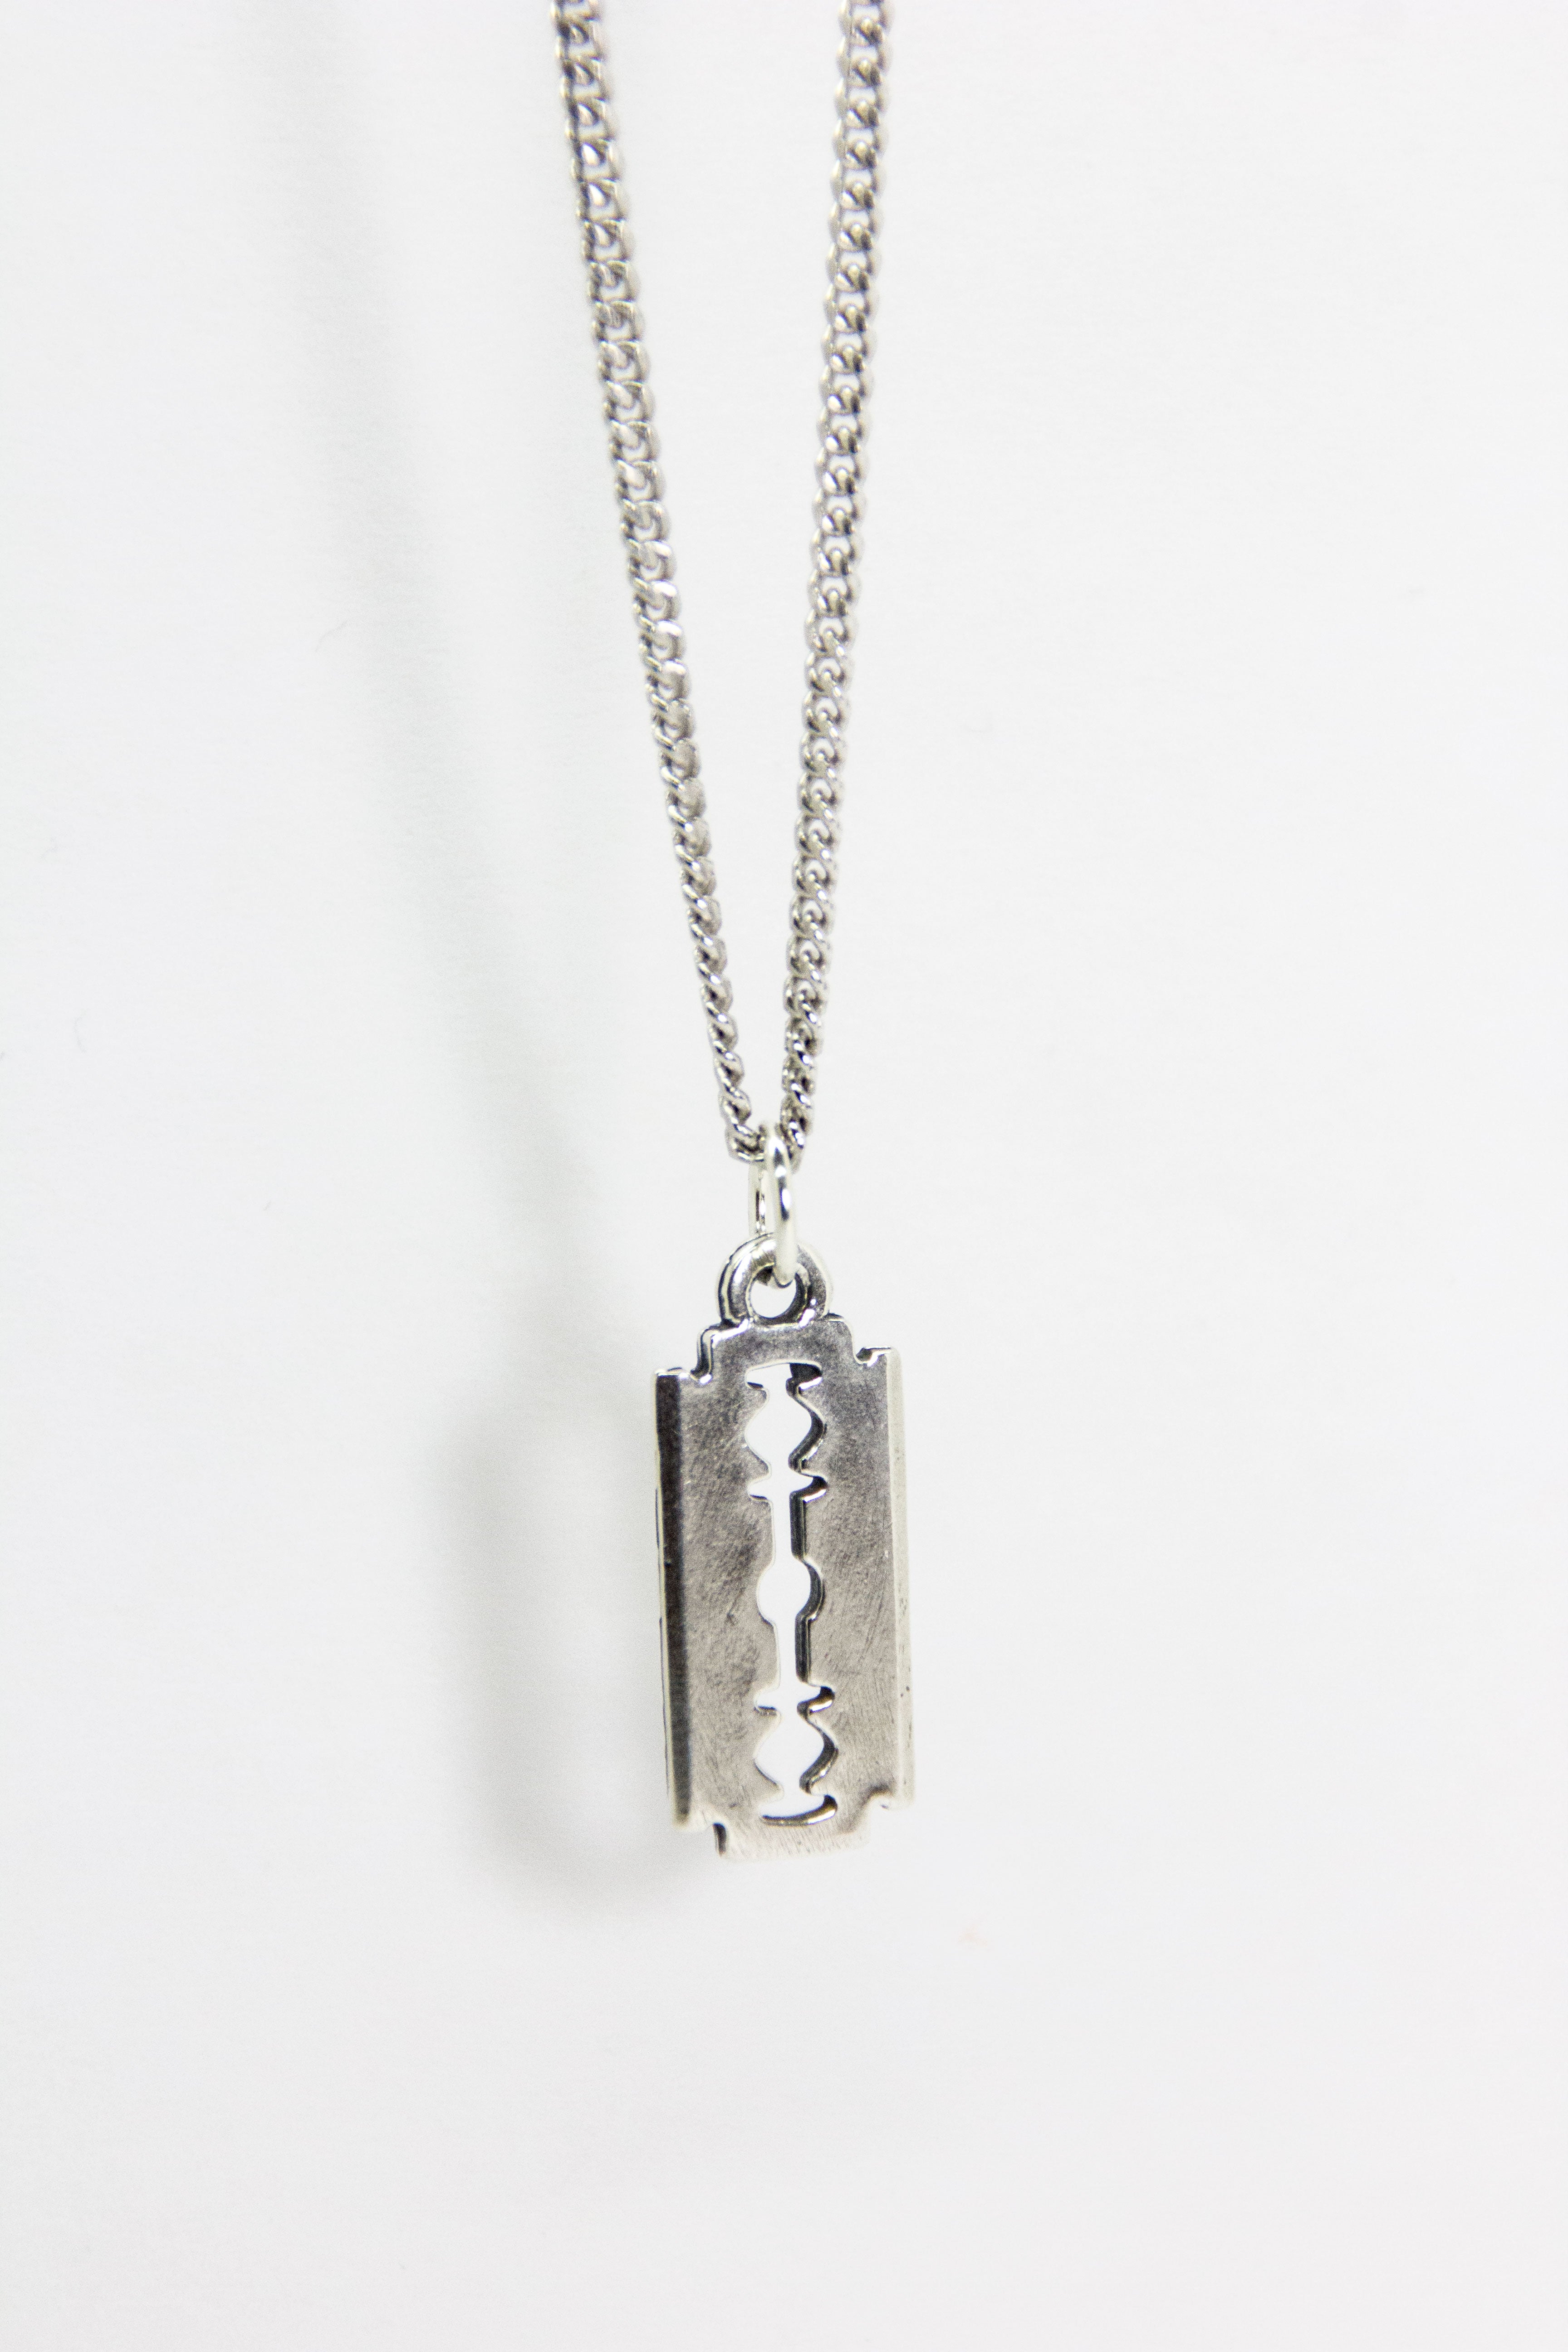 Silver Razor Blade Necklace on Vintage Ball Chain Jewelry for 